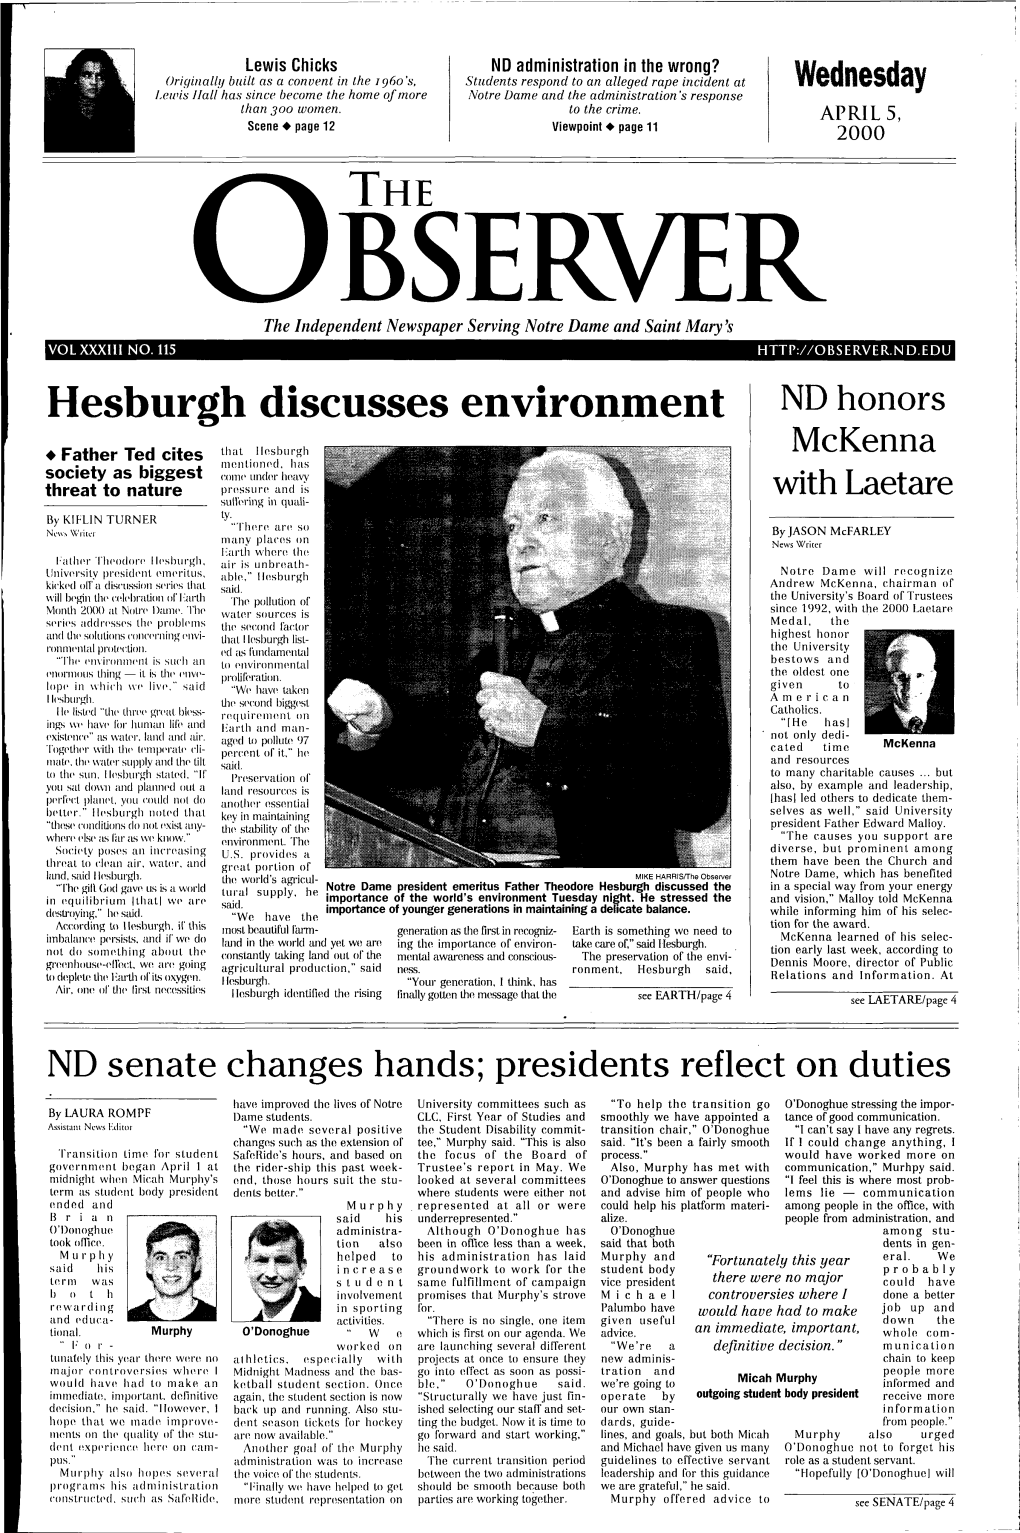 Hesburgh Discusses Environment ND Honors